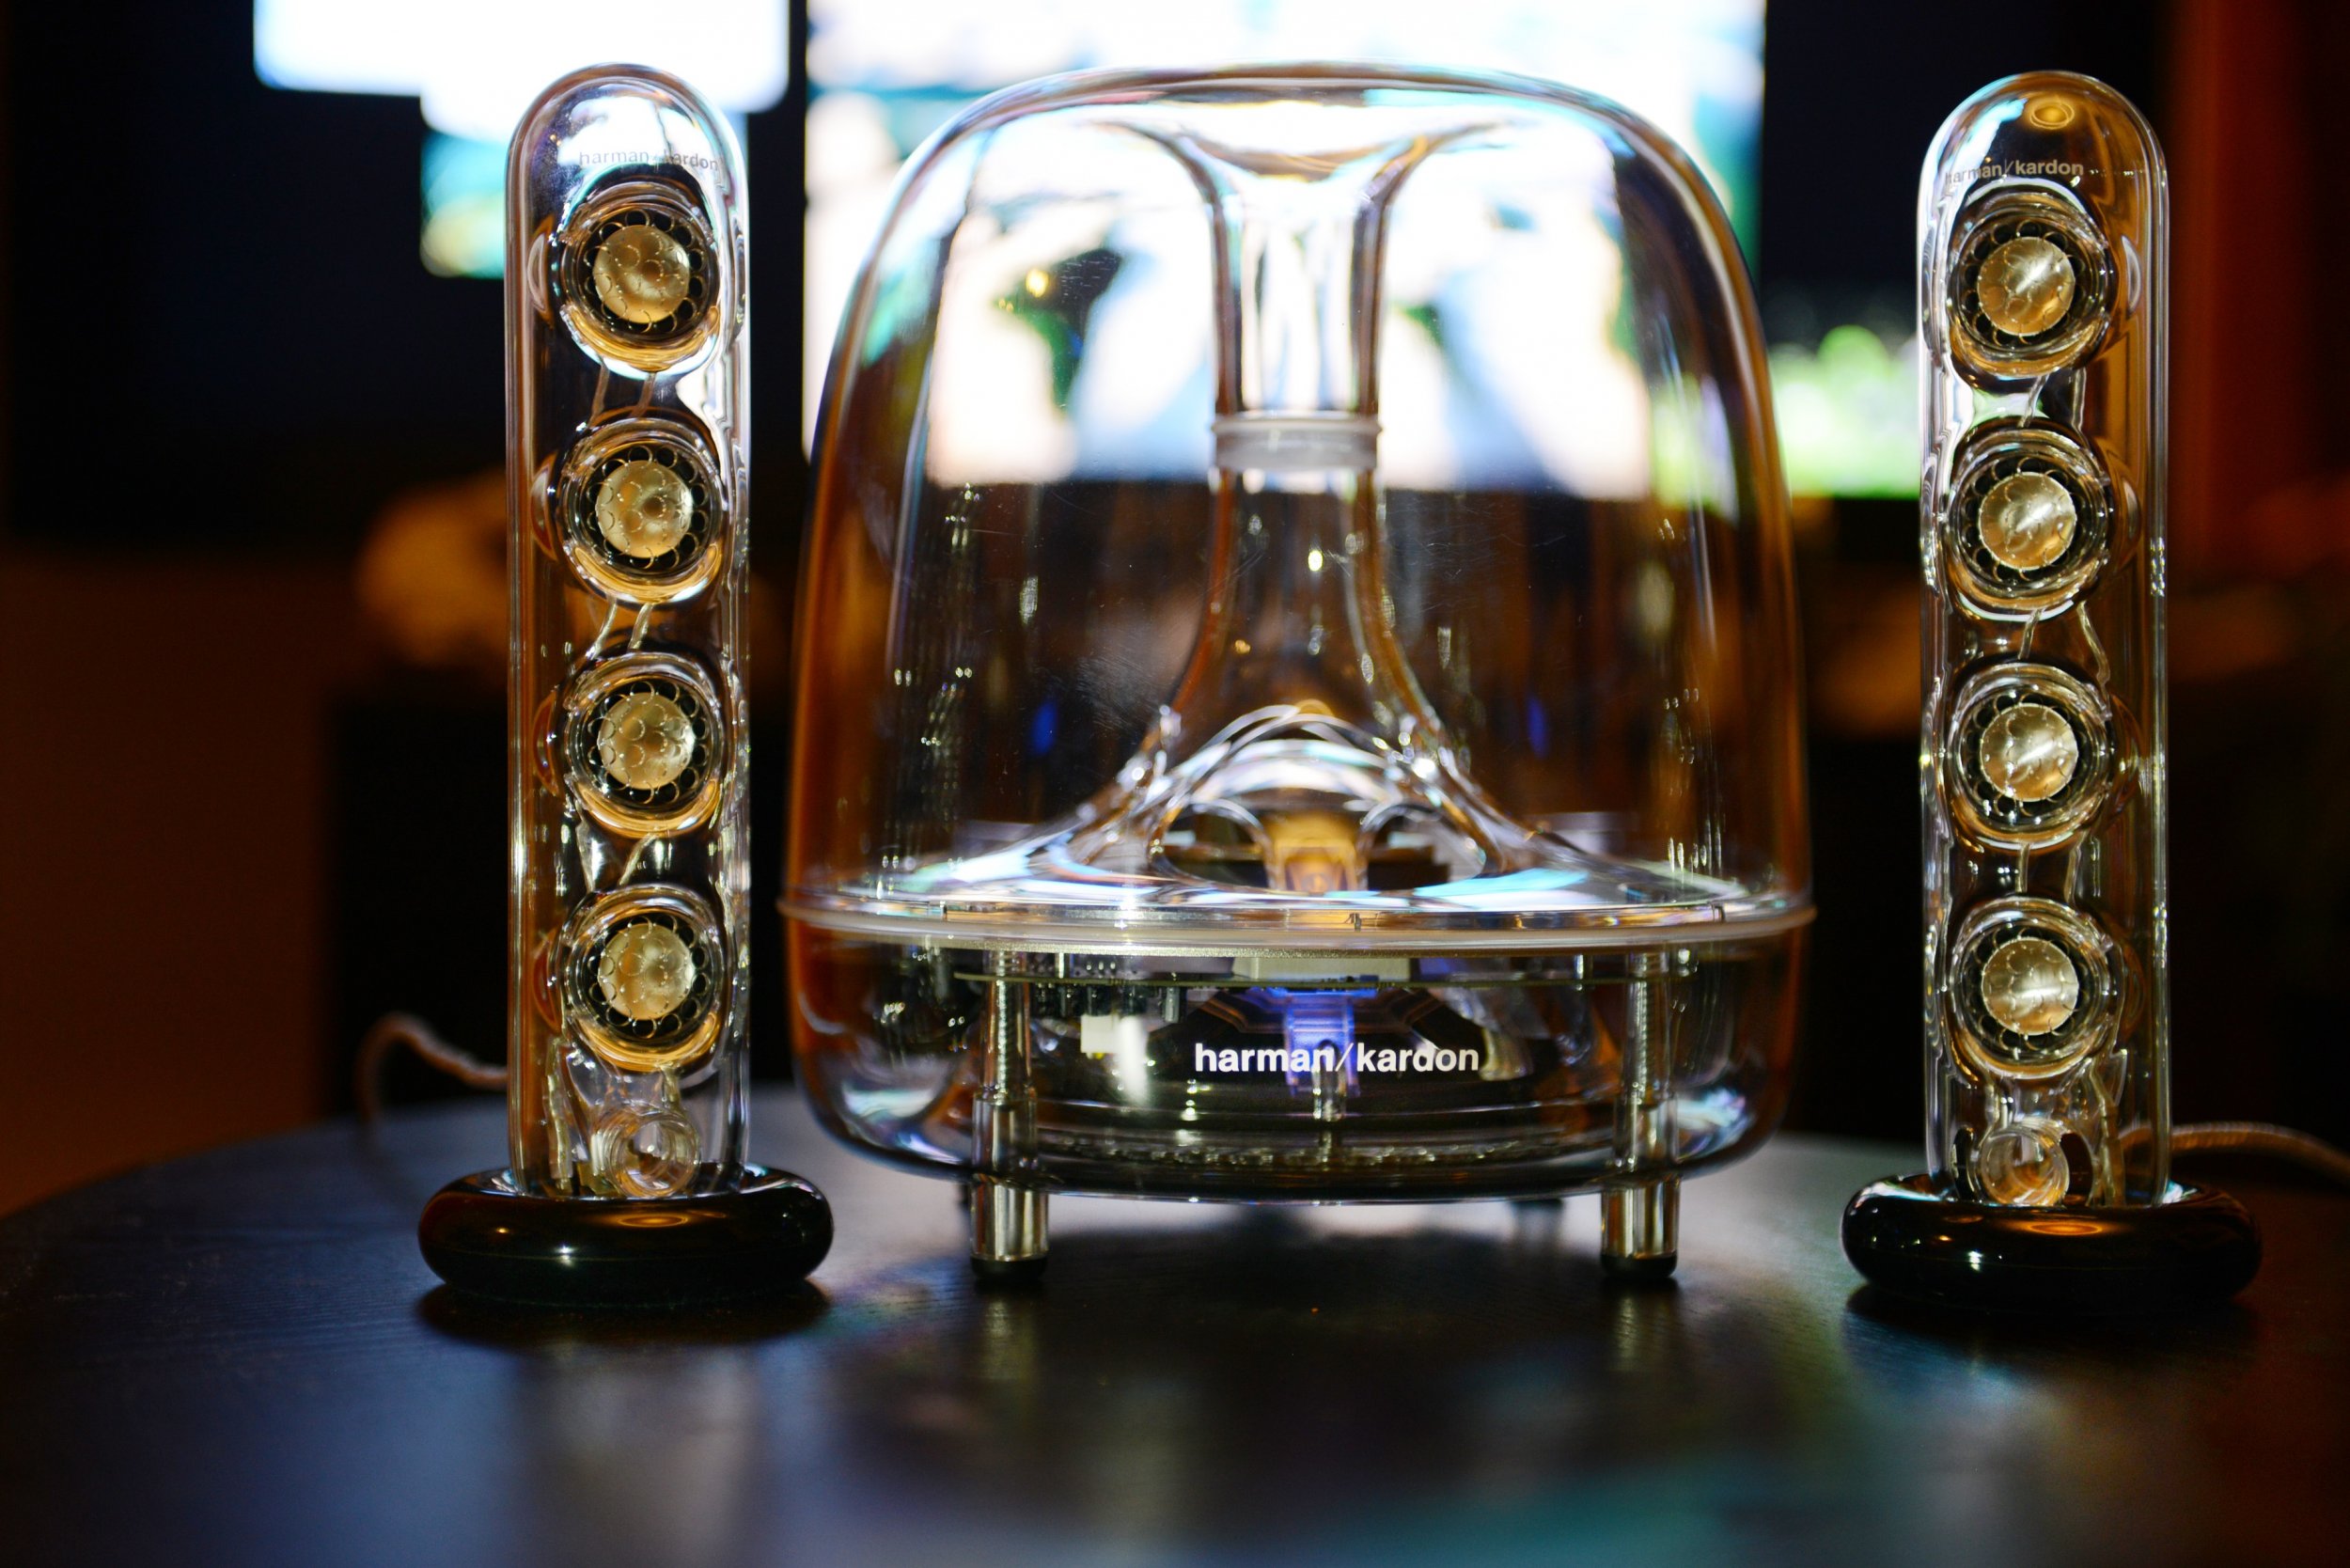 SoundSticks Wireless Review: The 'Apple iSub' Is As Elegant And